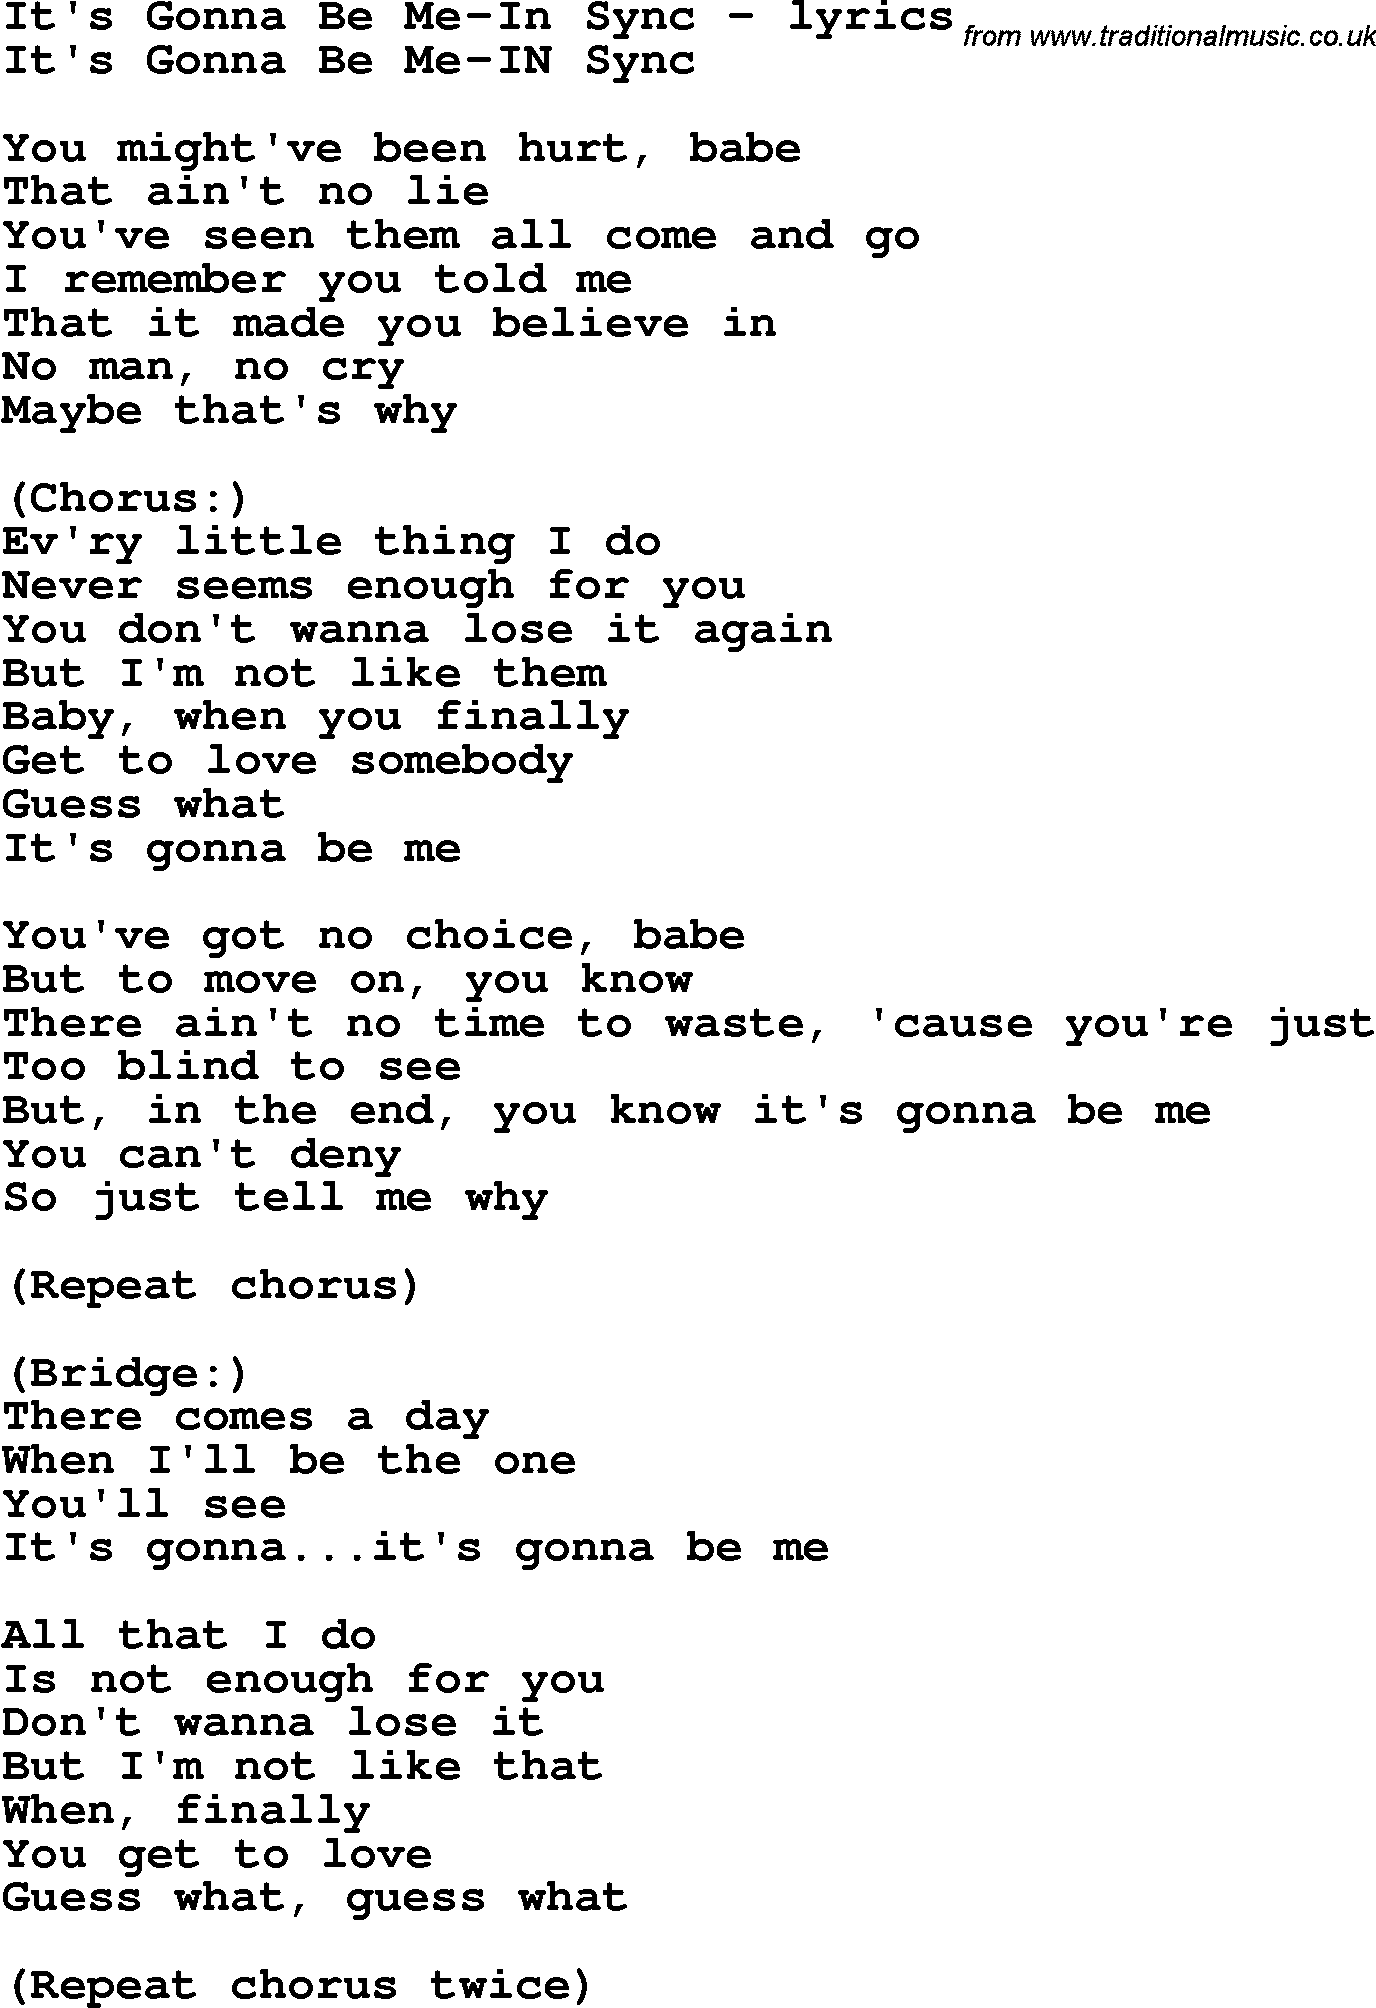 Love Song Lyrics for: It's Gonna Be Me-In Sync